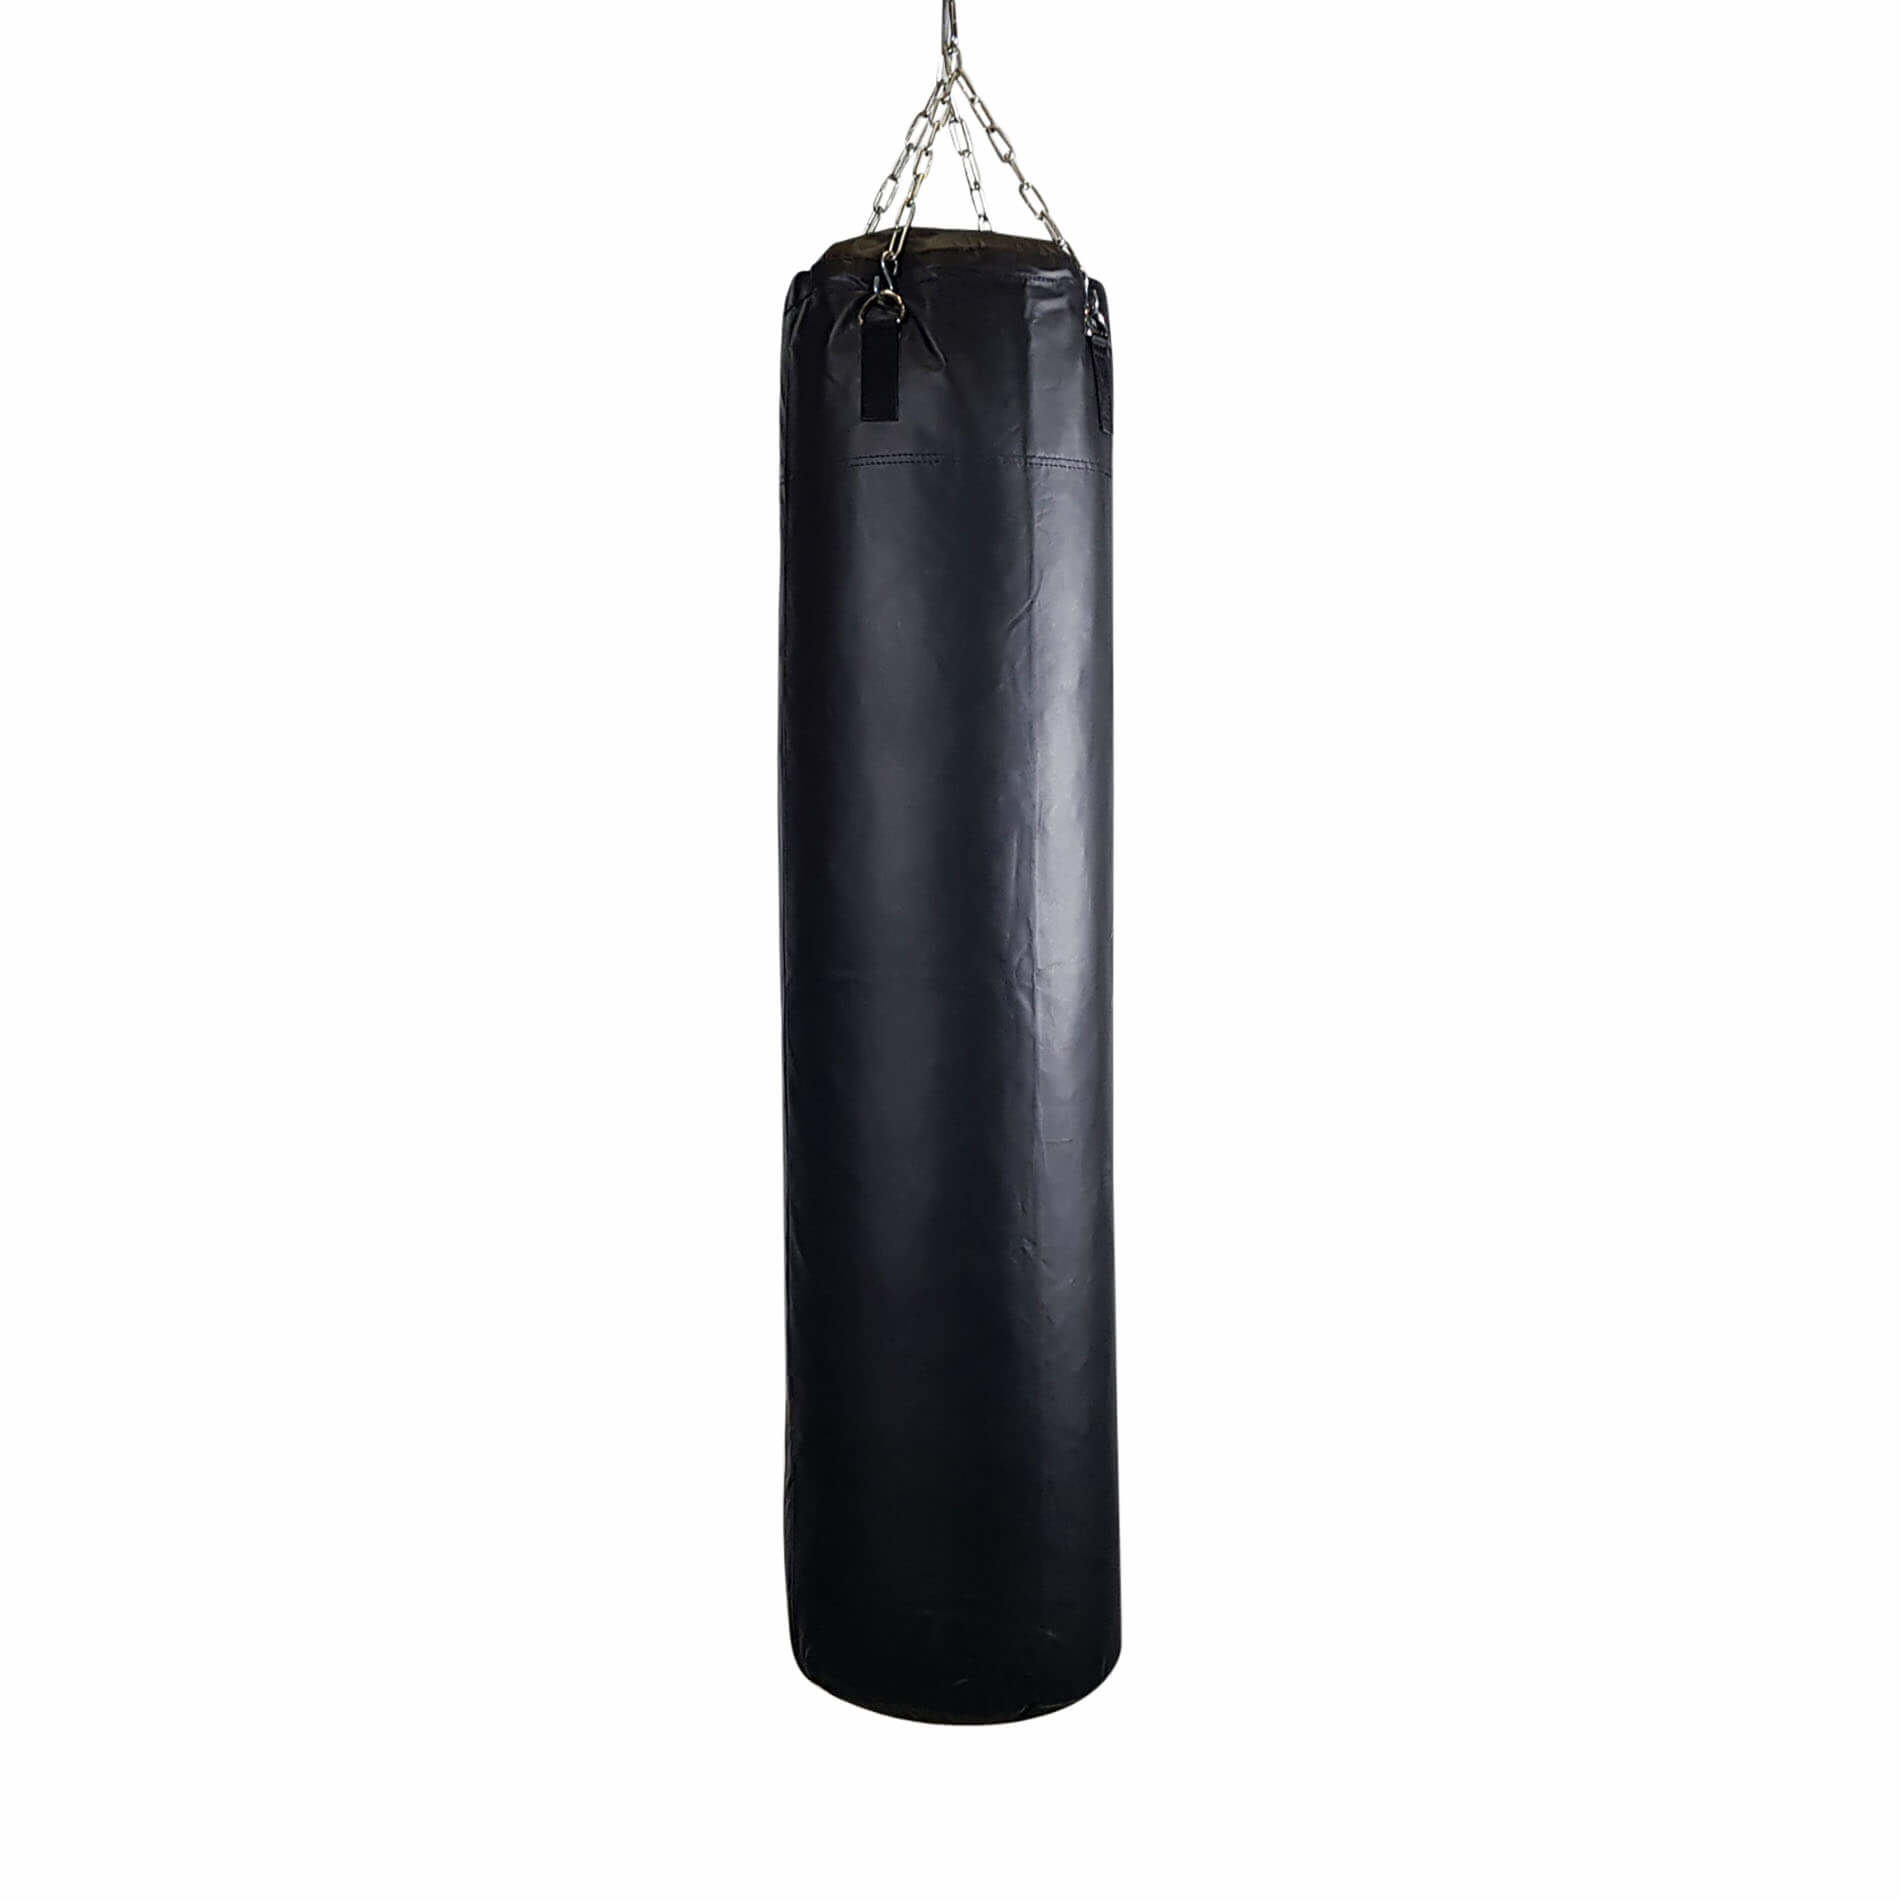 Source Professional Boxing Equipment Standing Heavy Punching bags Training  Target Boxing Punching Bag on m.alibaba.com